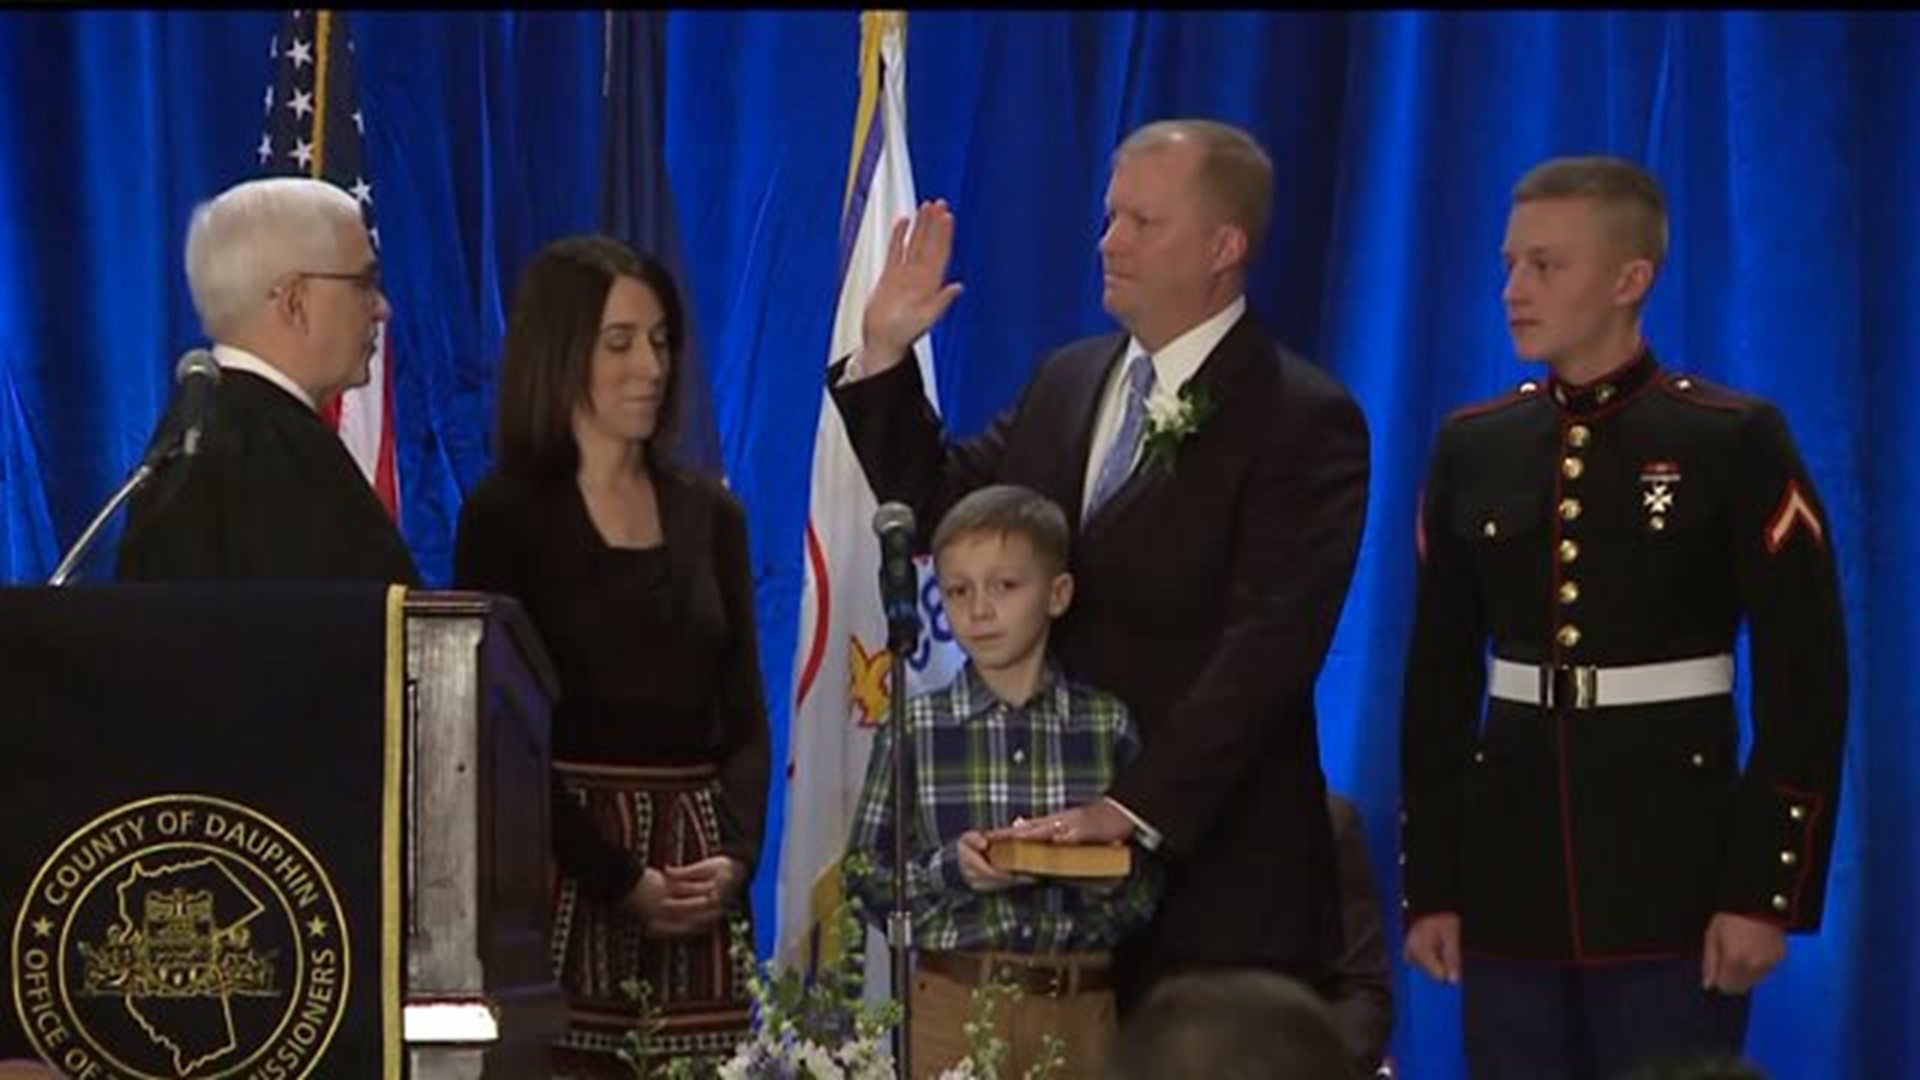 Dauphin County commissioners sworn in at downtown ceremony